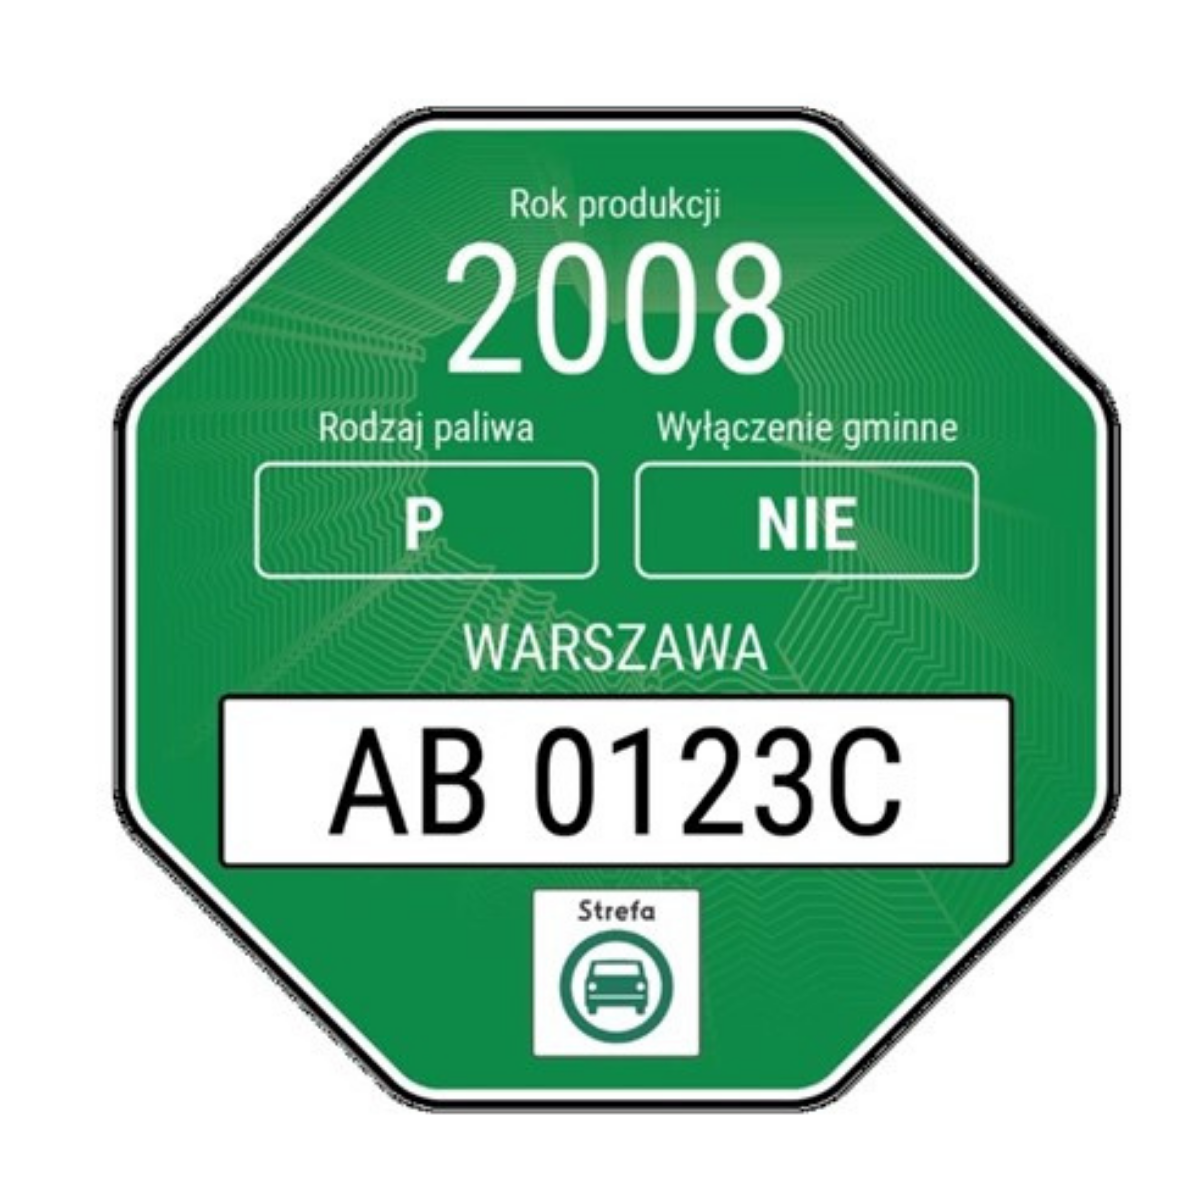 The ecological sticker will soon become an obligation in Poland – main image